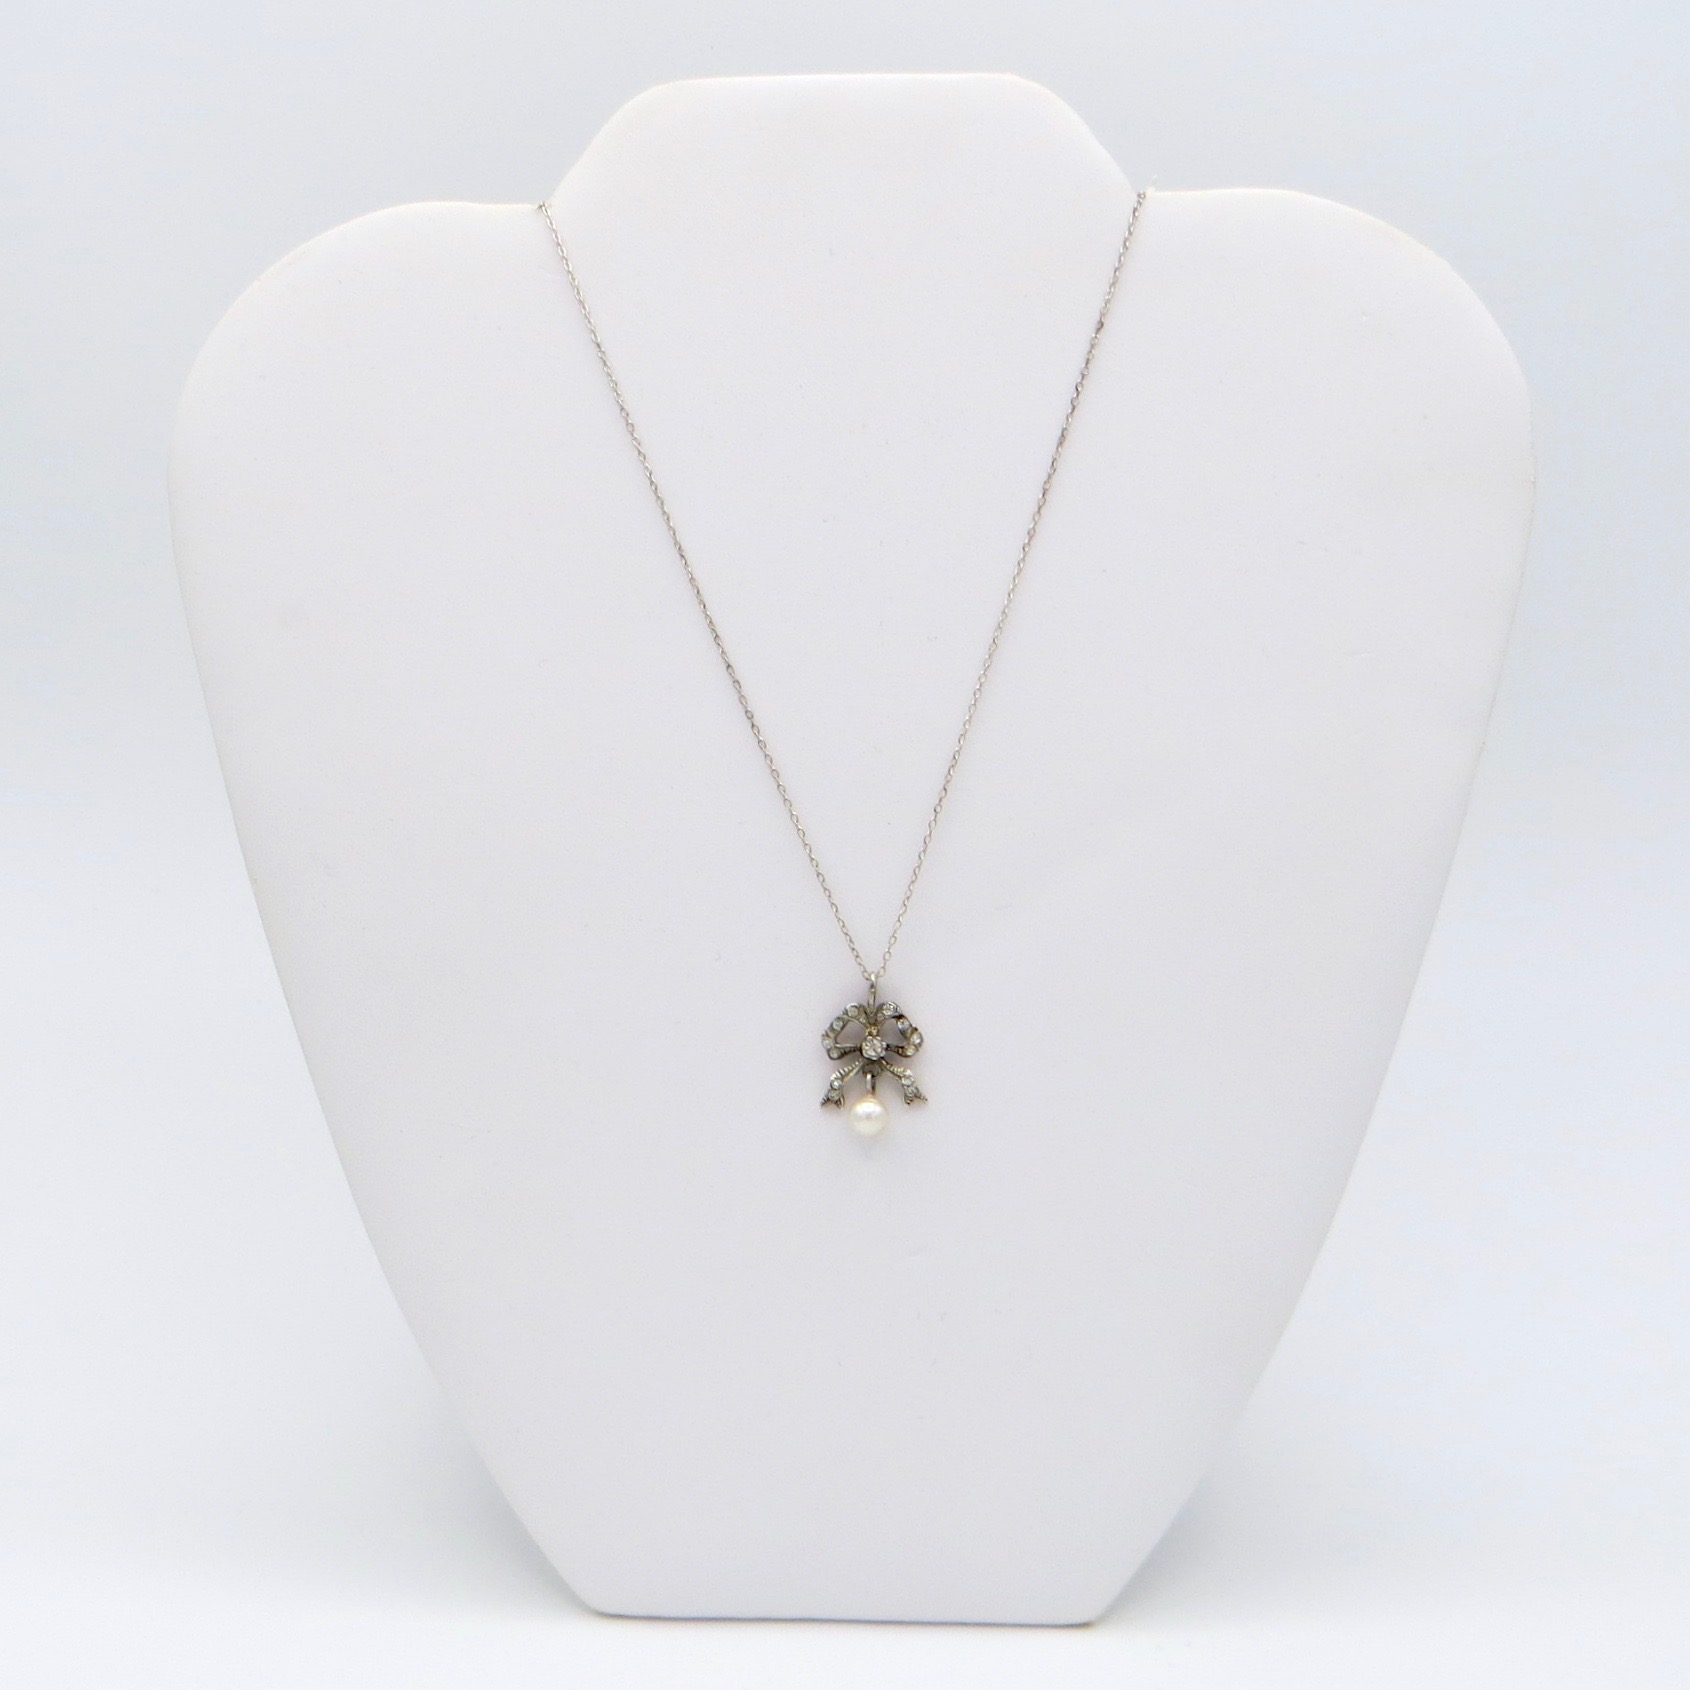 Sterling Silver Bow Necklace with Hanging Pearl